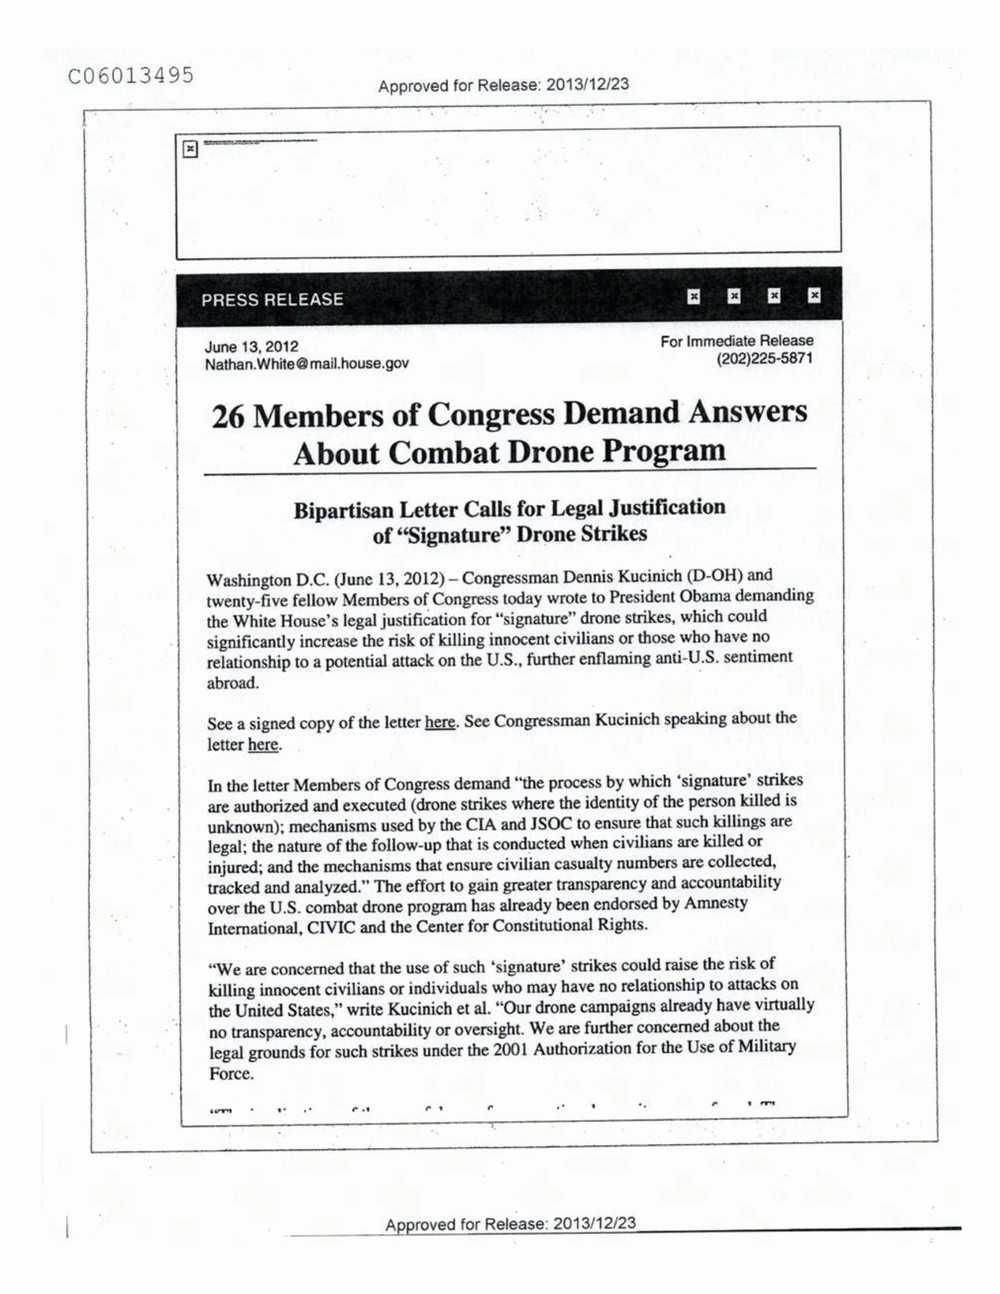 Page 348 from Email Correspondence Between Reporters and CIA Flacks